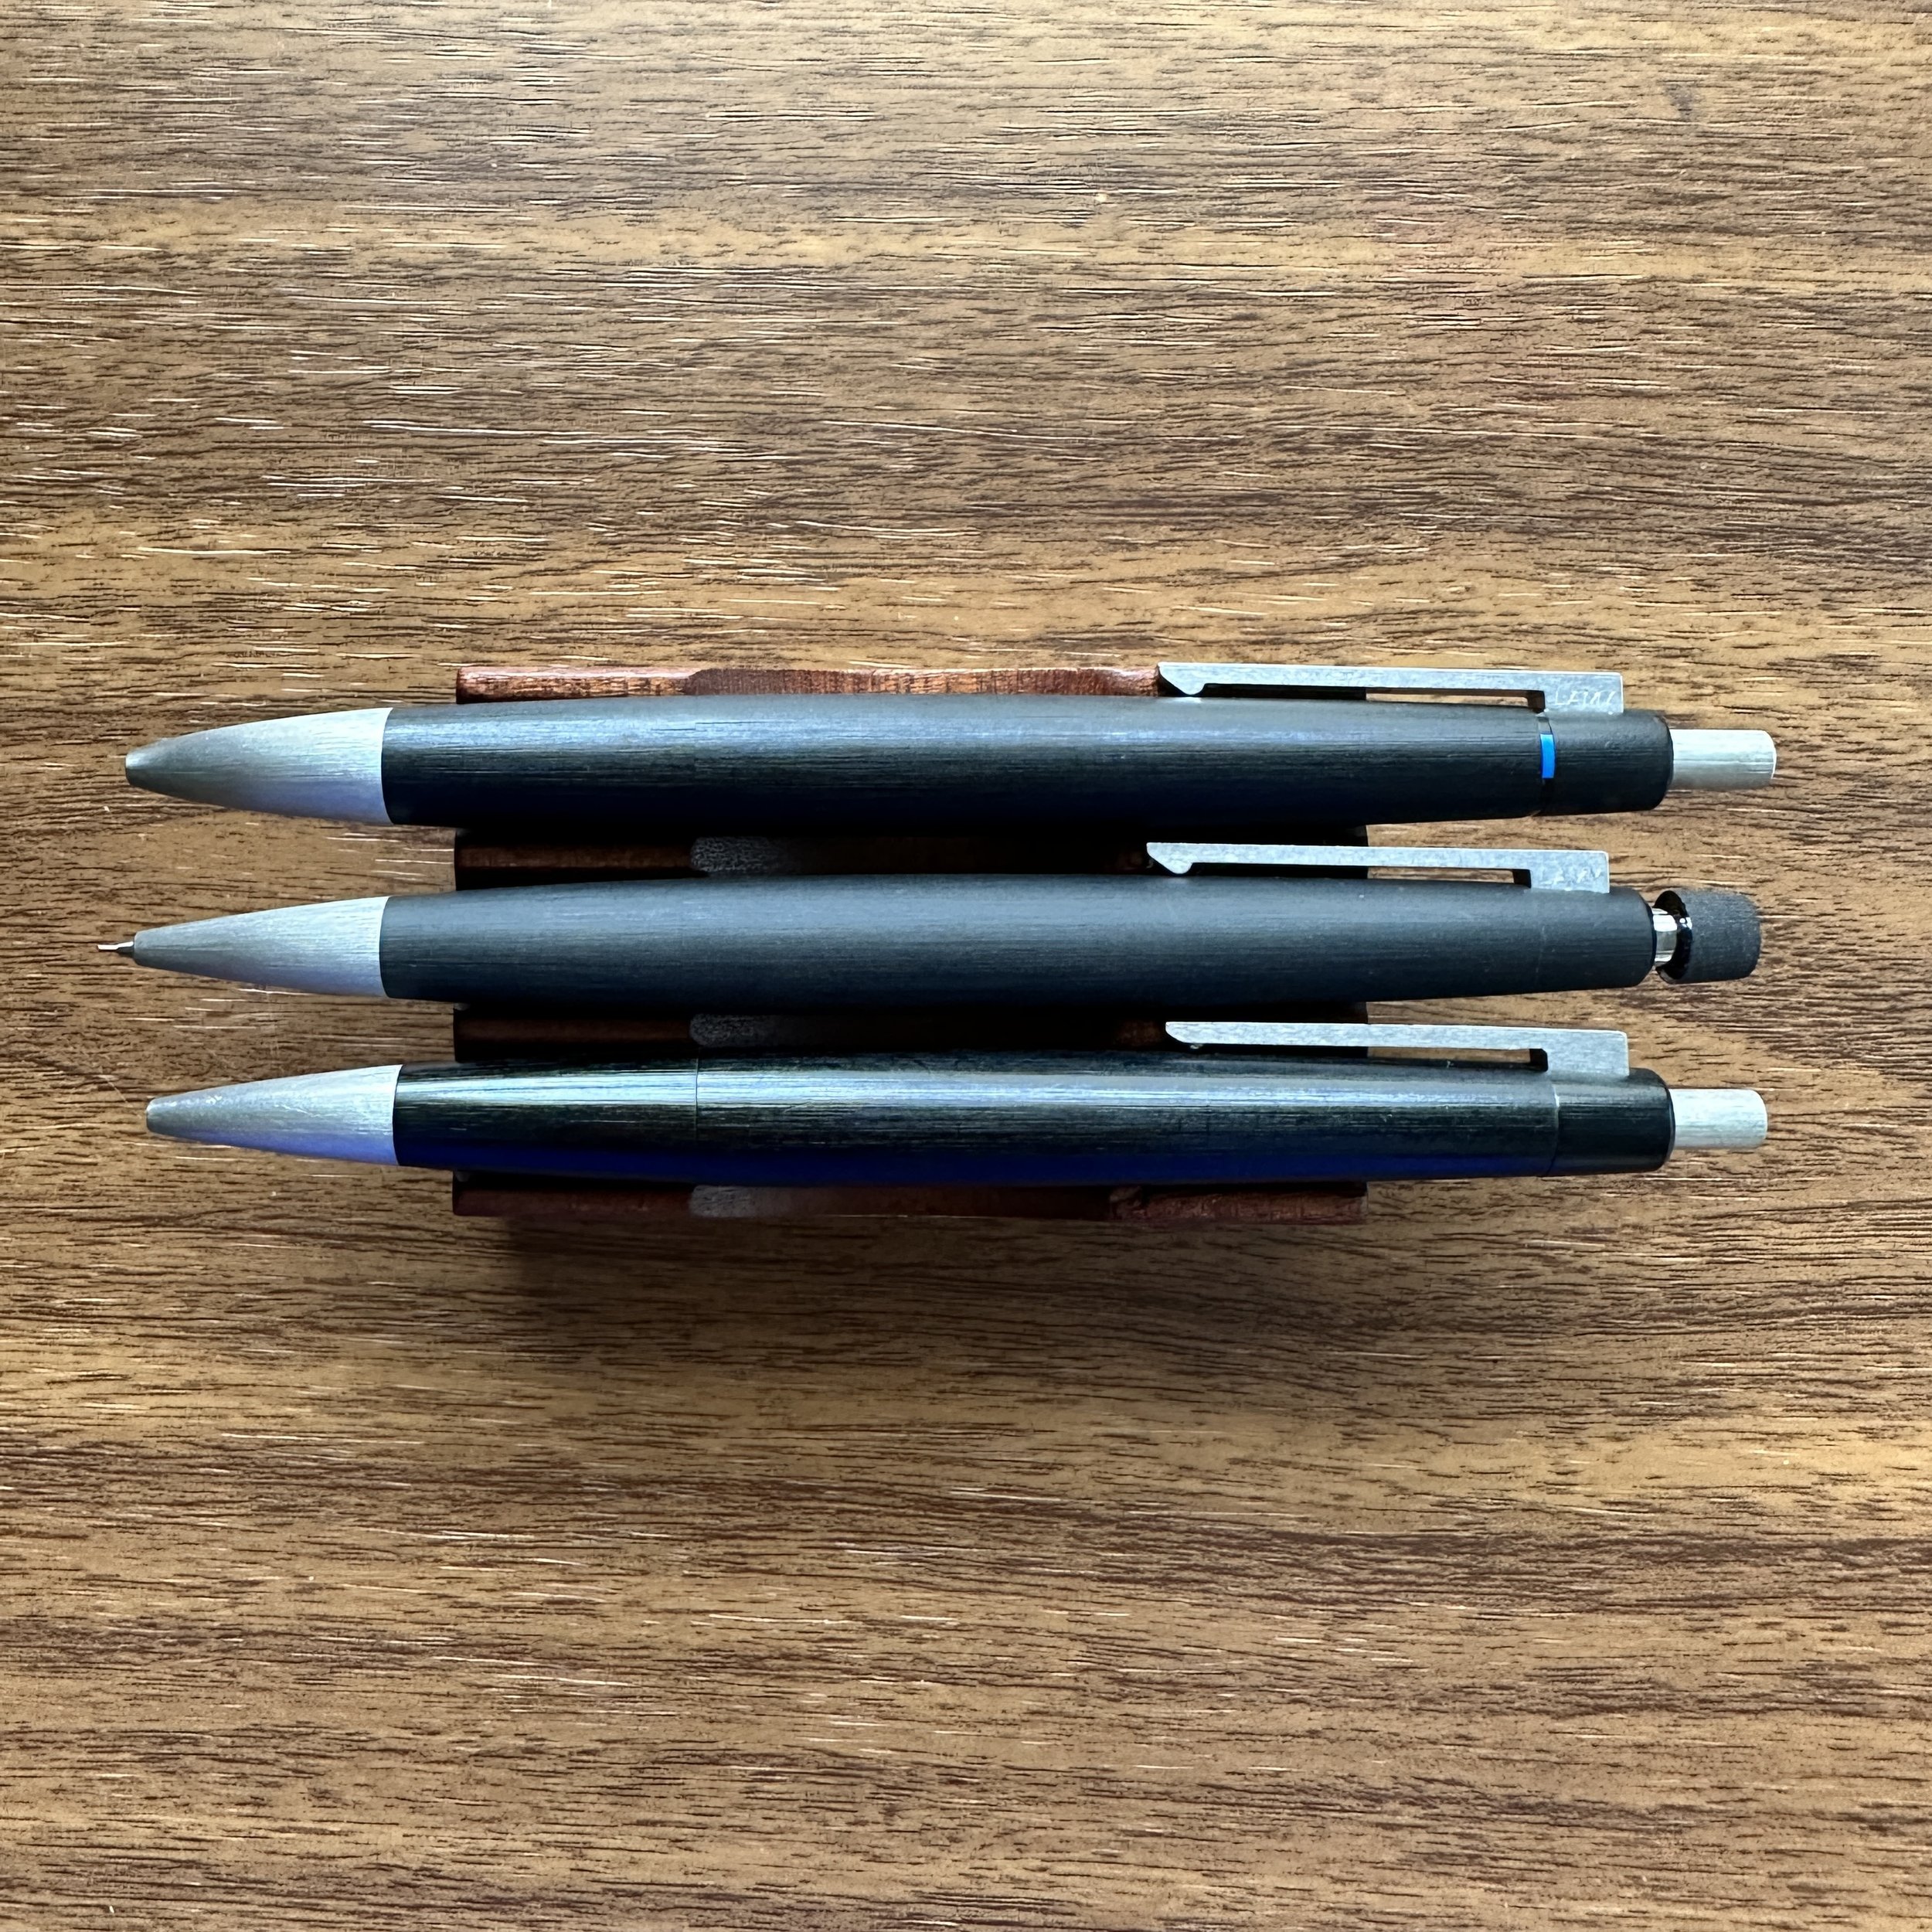 Technical Pens and Pencils: The TWSBI Precision Ballpoint and